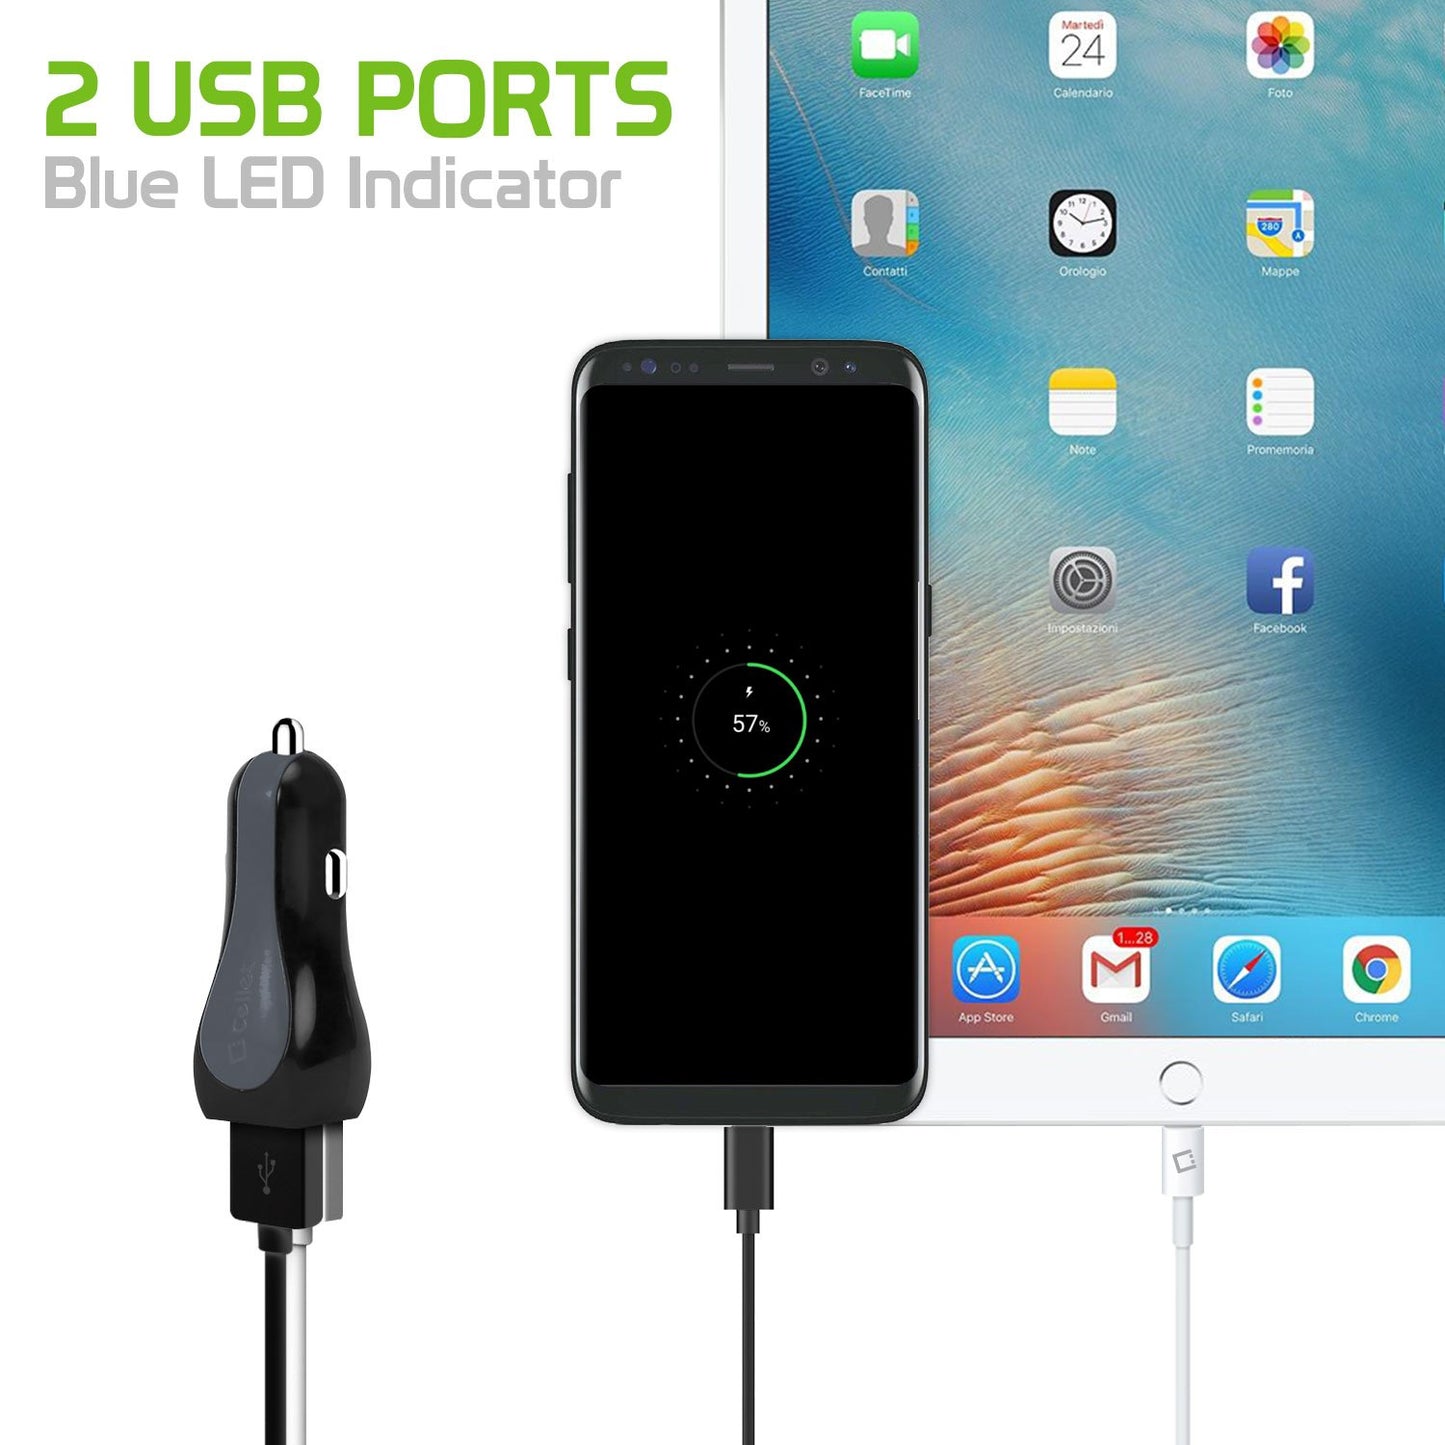 PUSBC3E - Cellet High Powered 3 Amp / 15W  DUAL USB Type-C Car Charger Adapter for Samsung Galaxy S8, Samsung Galaxy S8 Plus,  OnePlus 5, Google Pixel